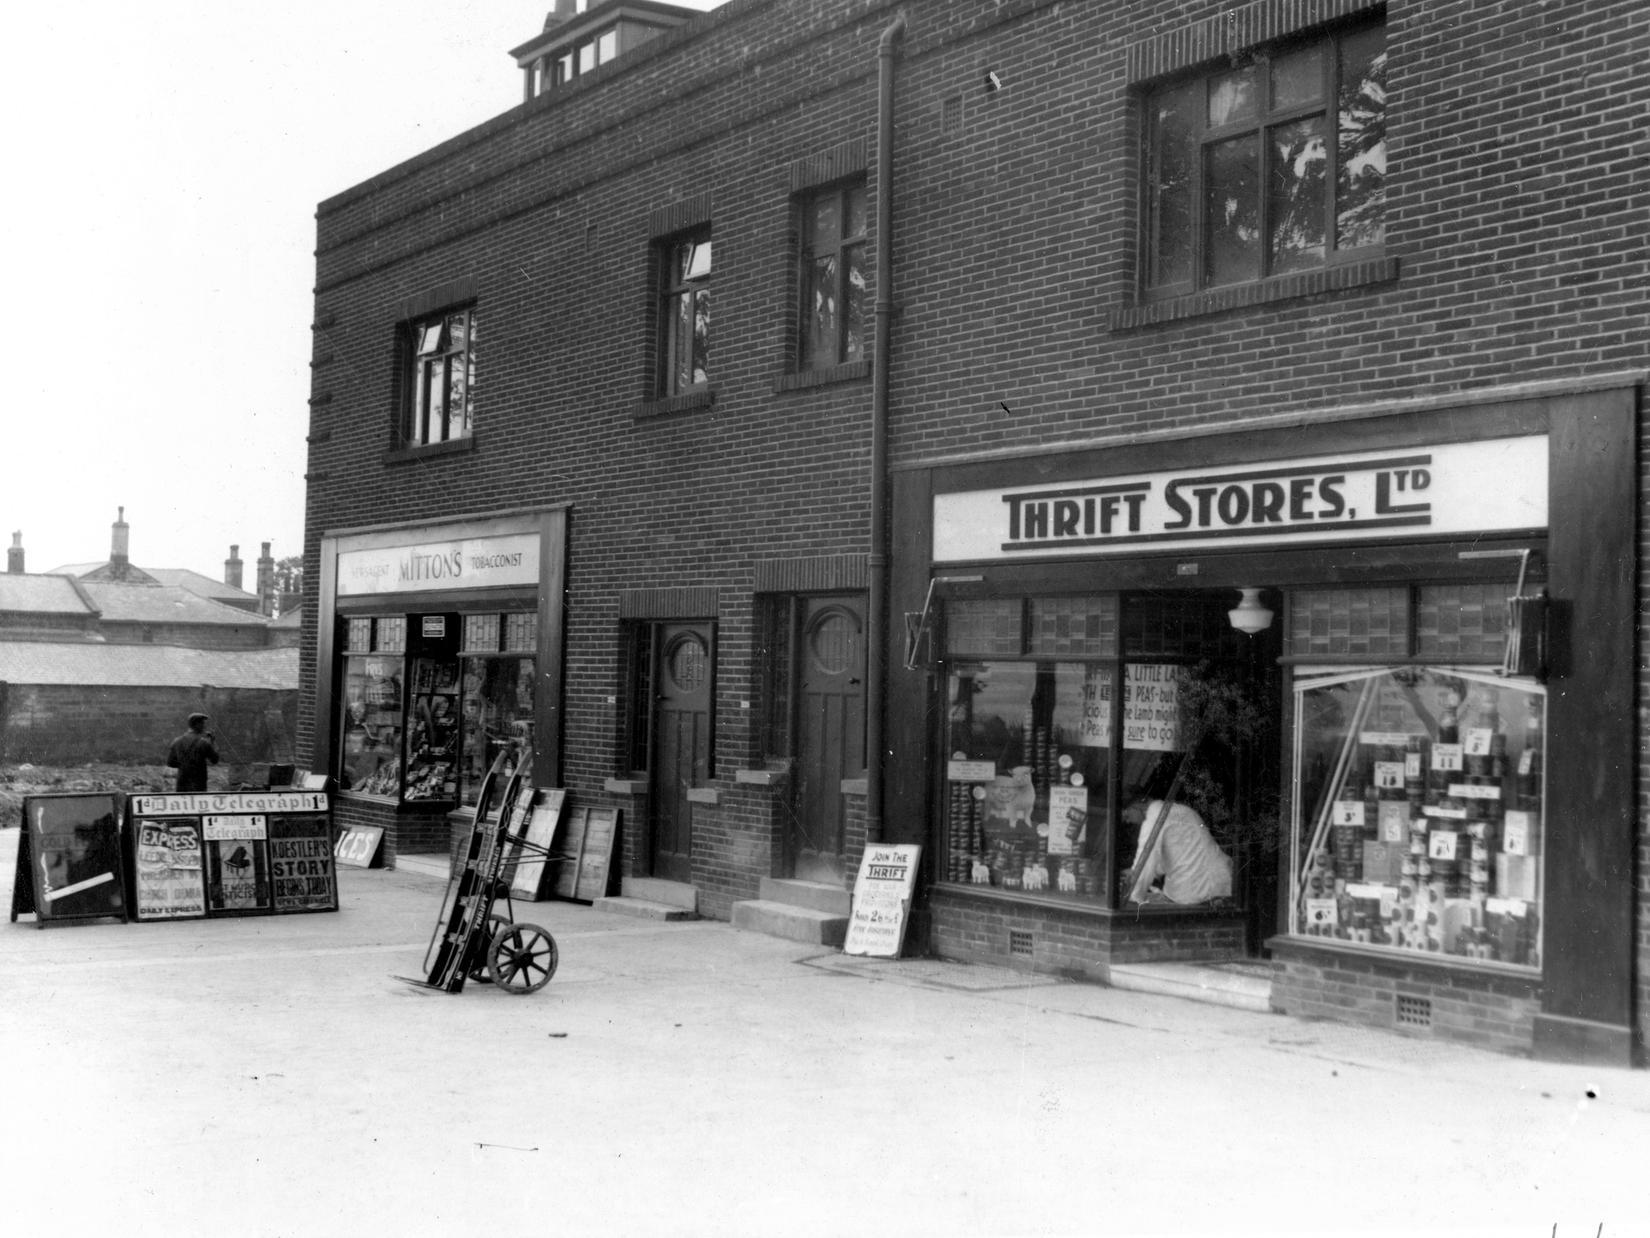 Thrift Stores which was at number 370 Oakwood Lane with Mitton's, Newsagent and Tobacconist on the left at junction with Amberton Approach.